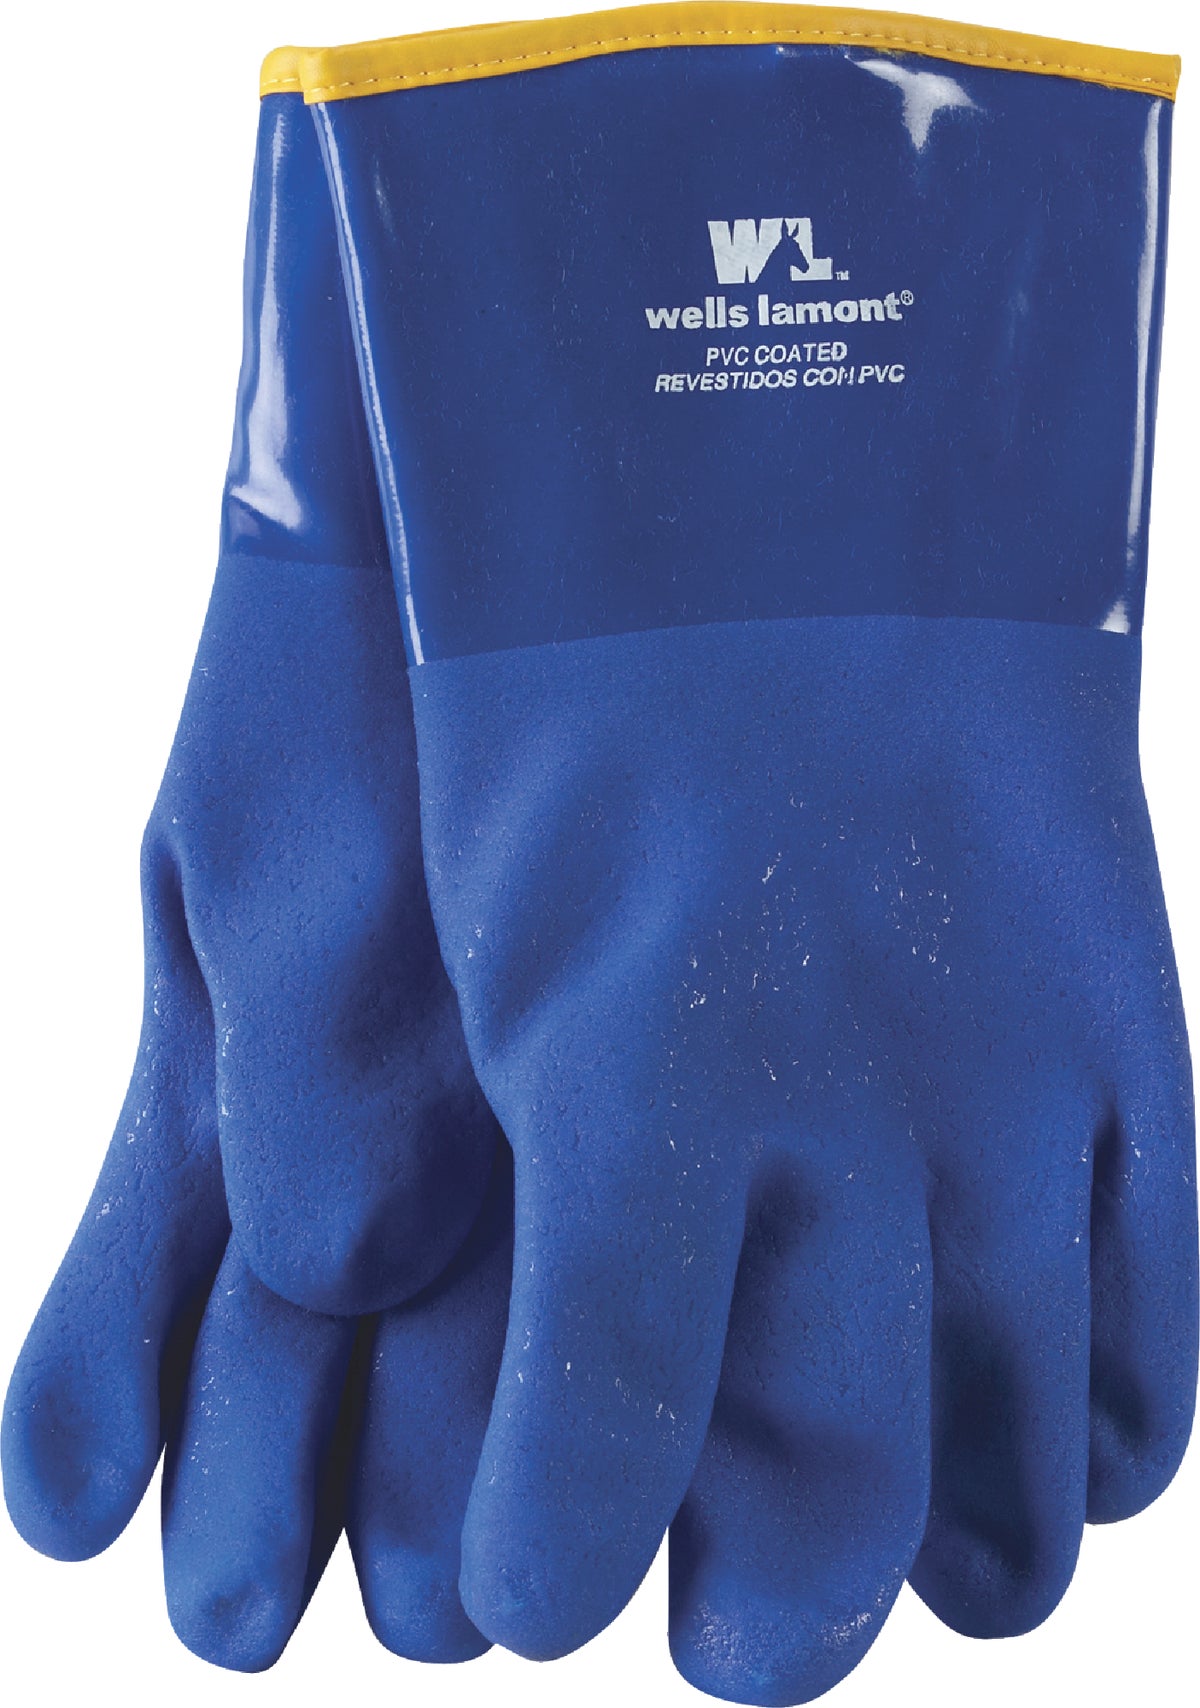 Wells Lamont Orng Pvc Insulated Glove 